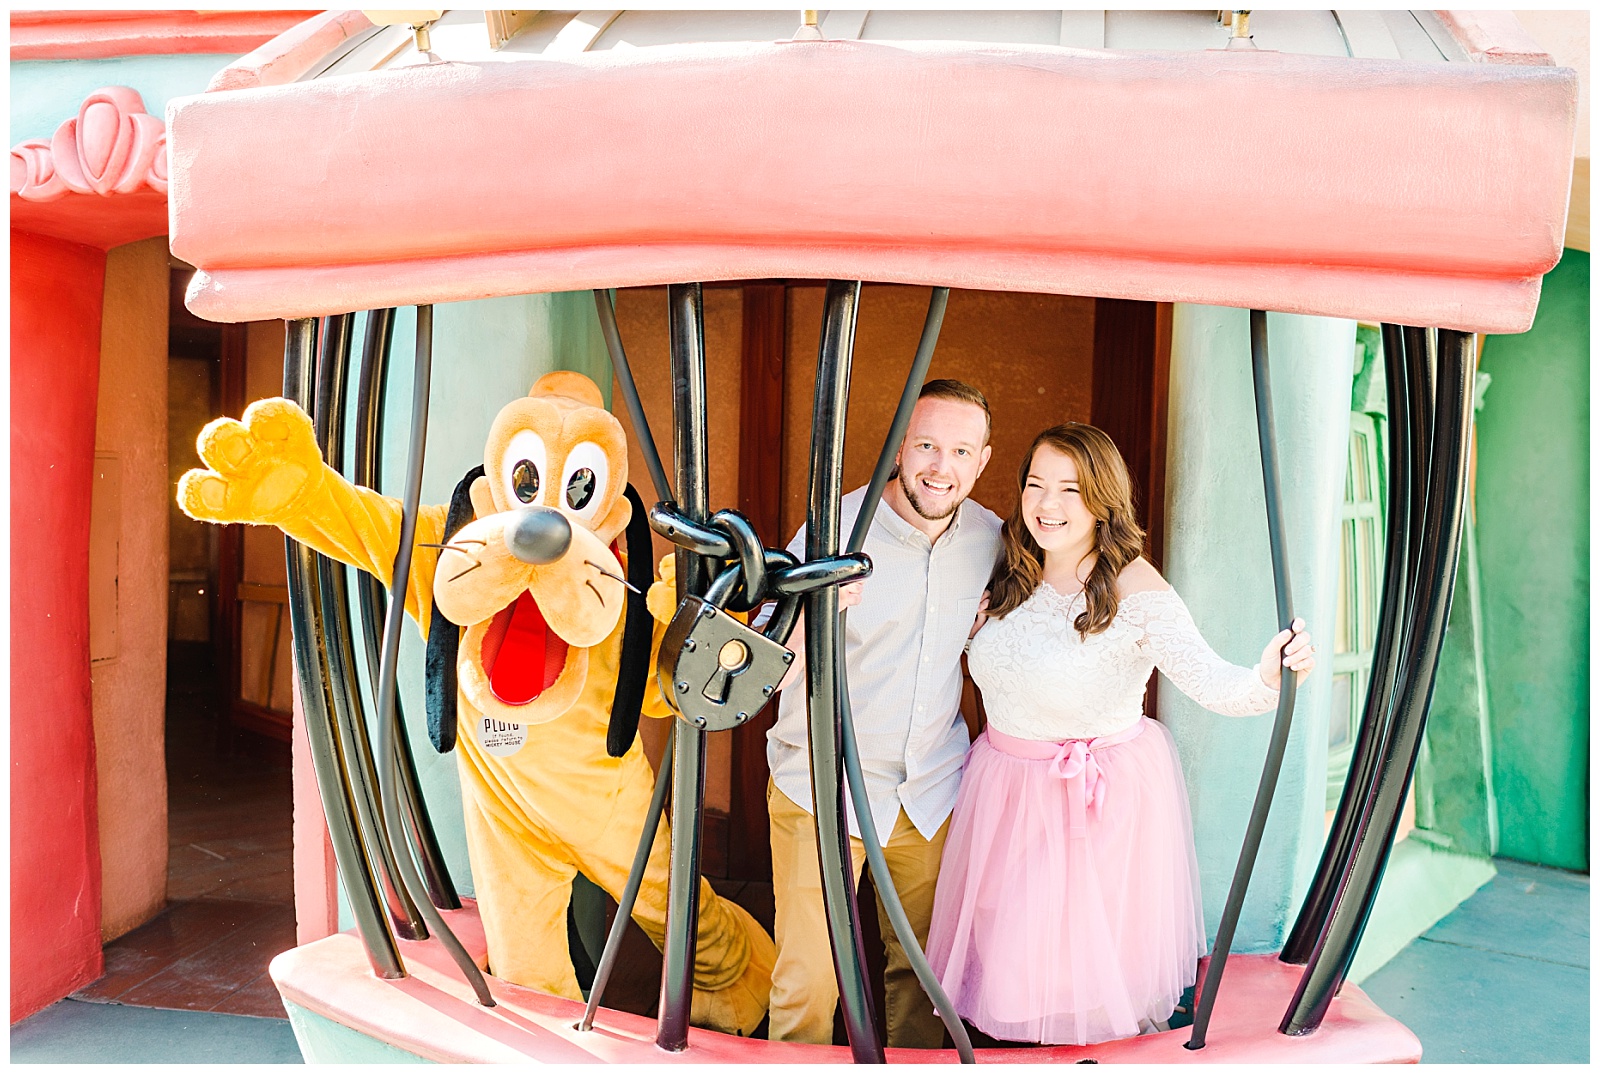 Disneyland Engagement Session.  Photographed by Mollie Jane Photography.  To see more of this session go to www.molliejanephotography.com